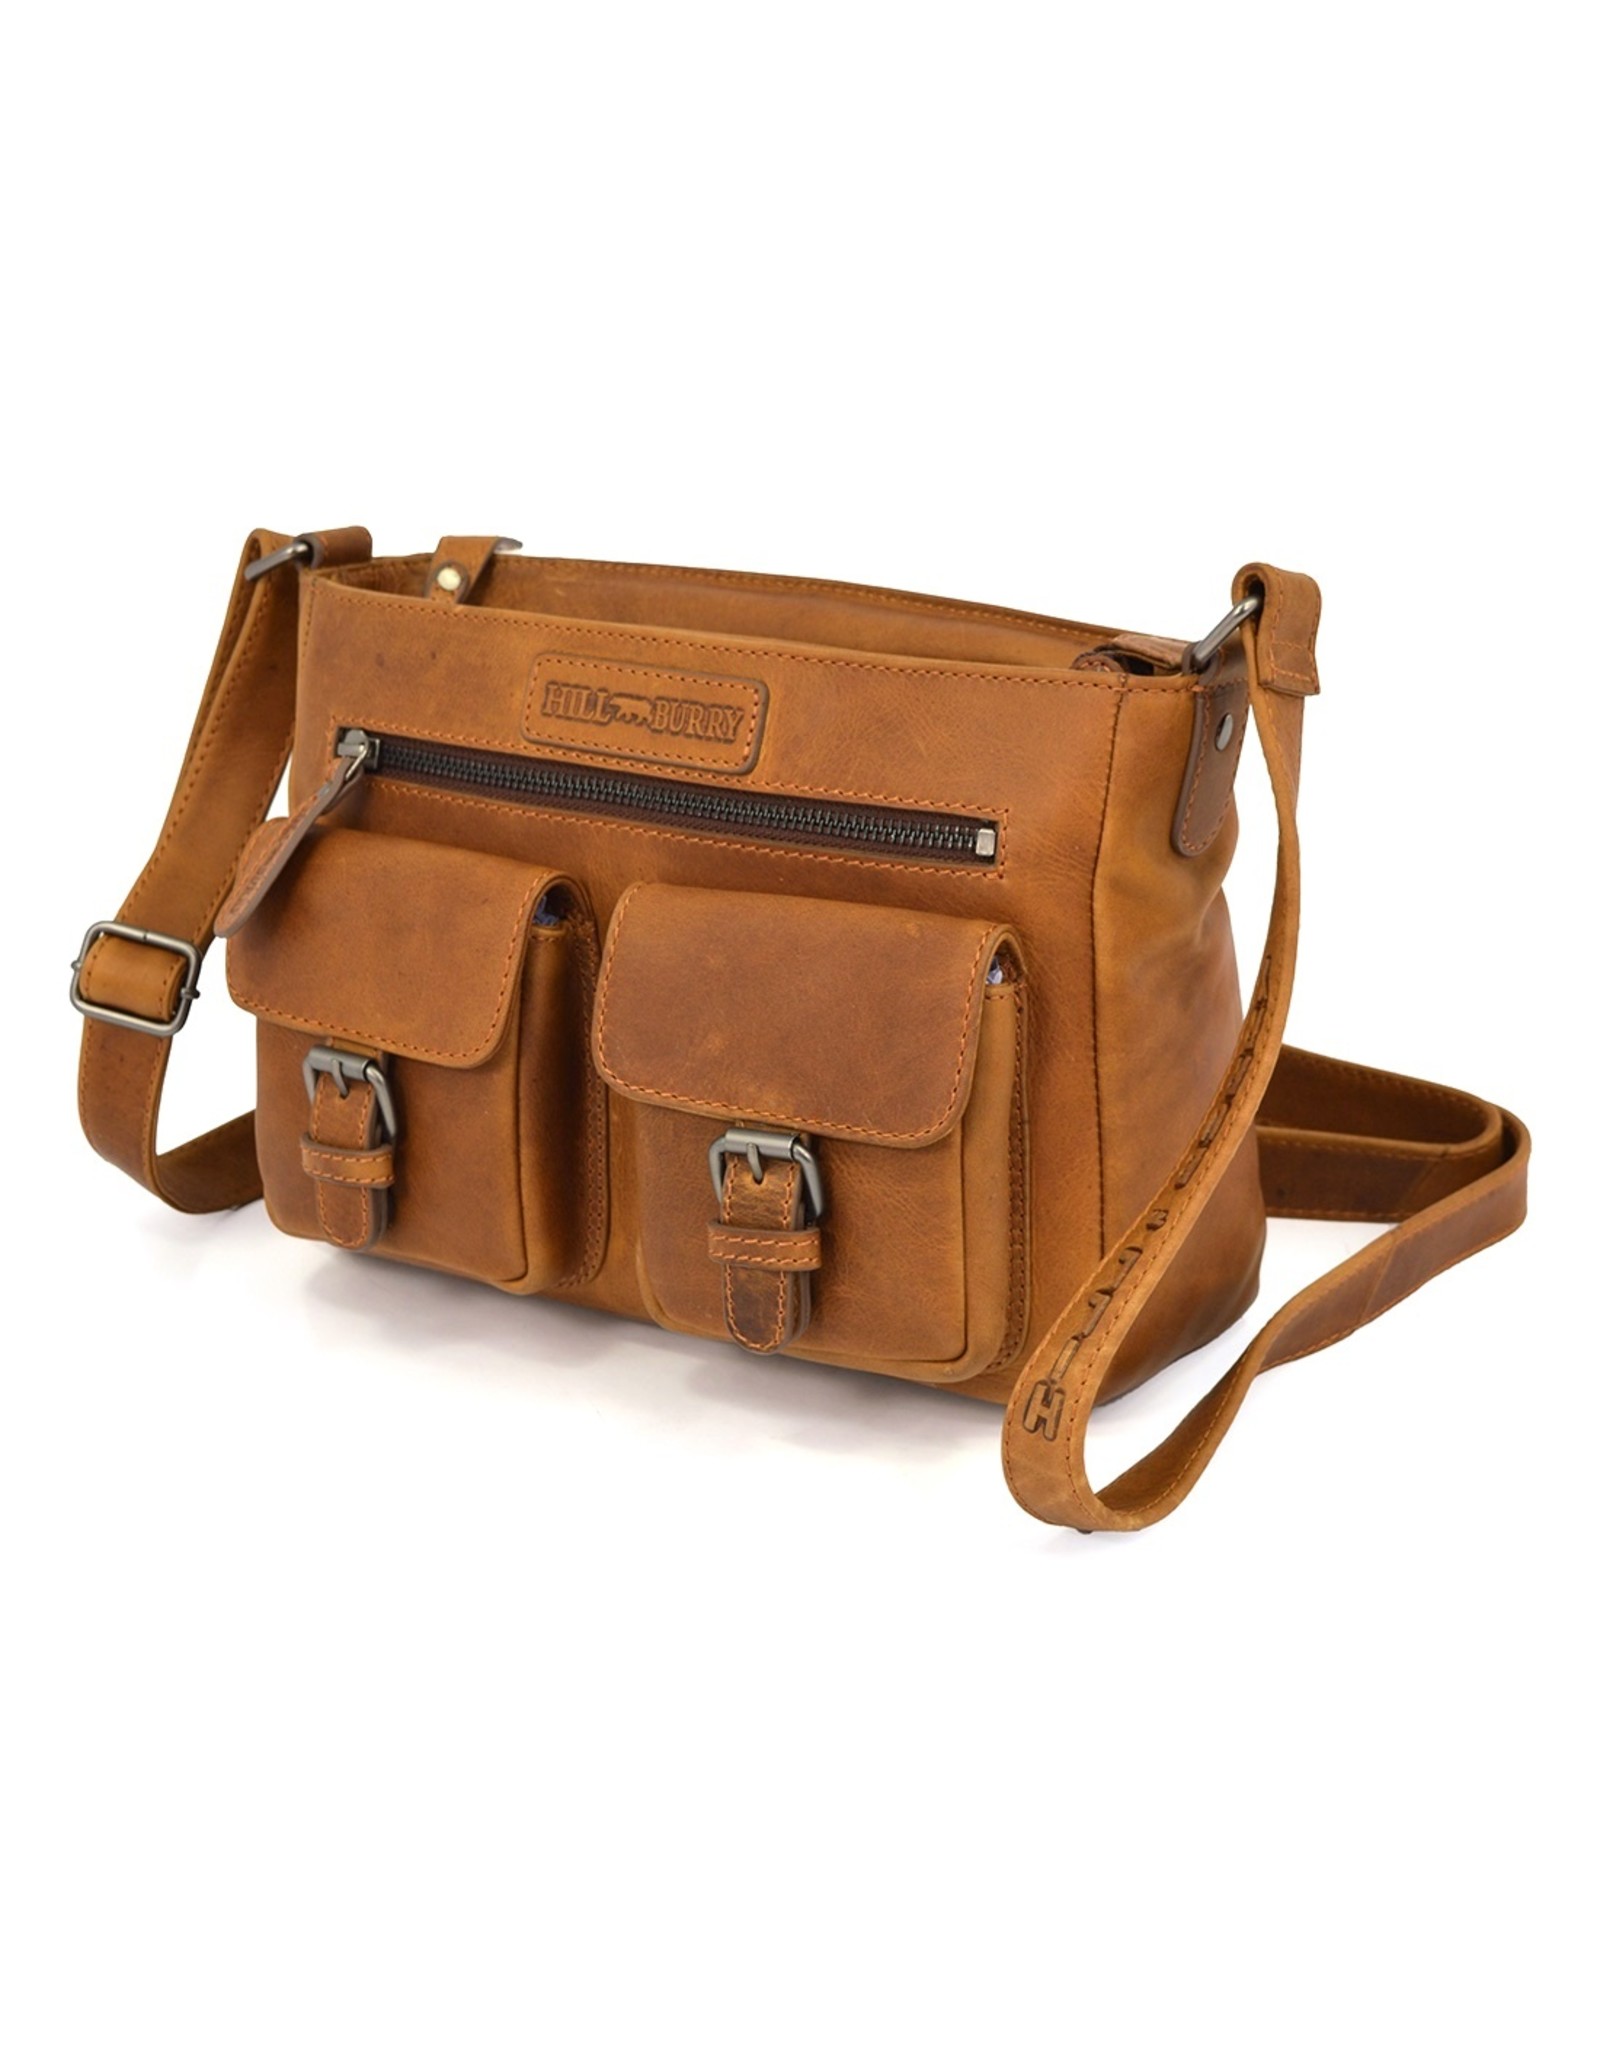 HillBurry Leather Shoulder bags  Leather crossbody bags - HillBurry Leather Shoulder Bag with Two Separate Compartments